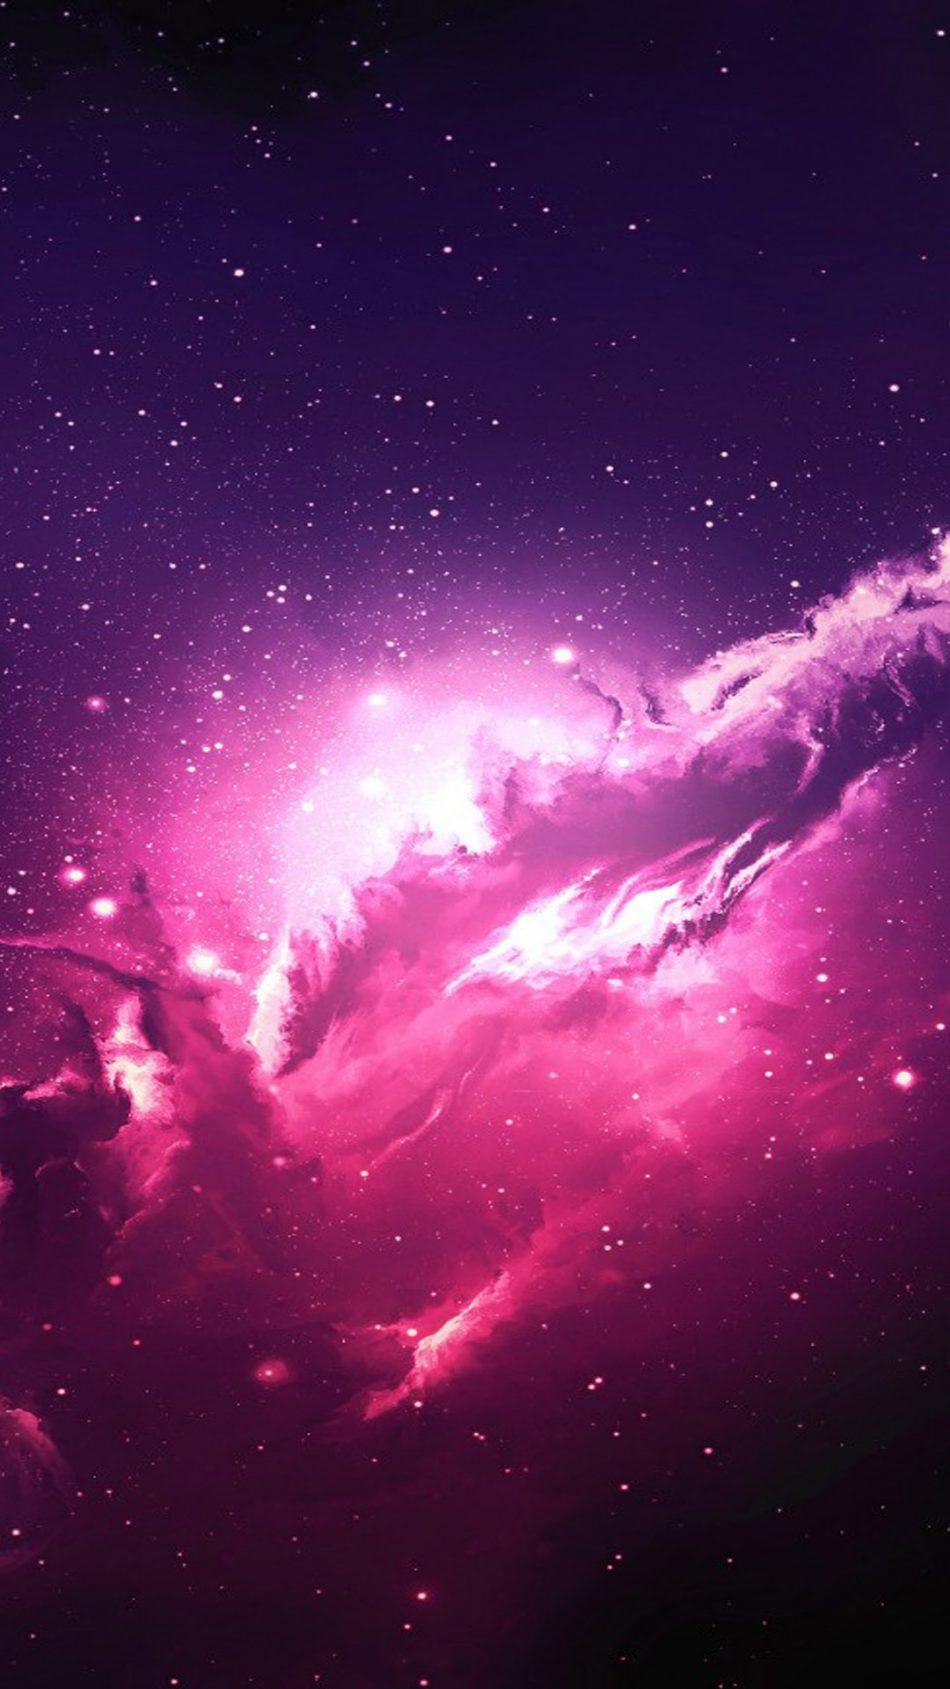 4k Wallpaper For Mobile Galaxy